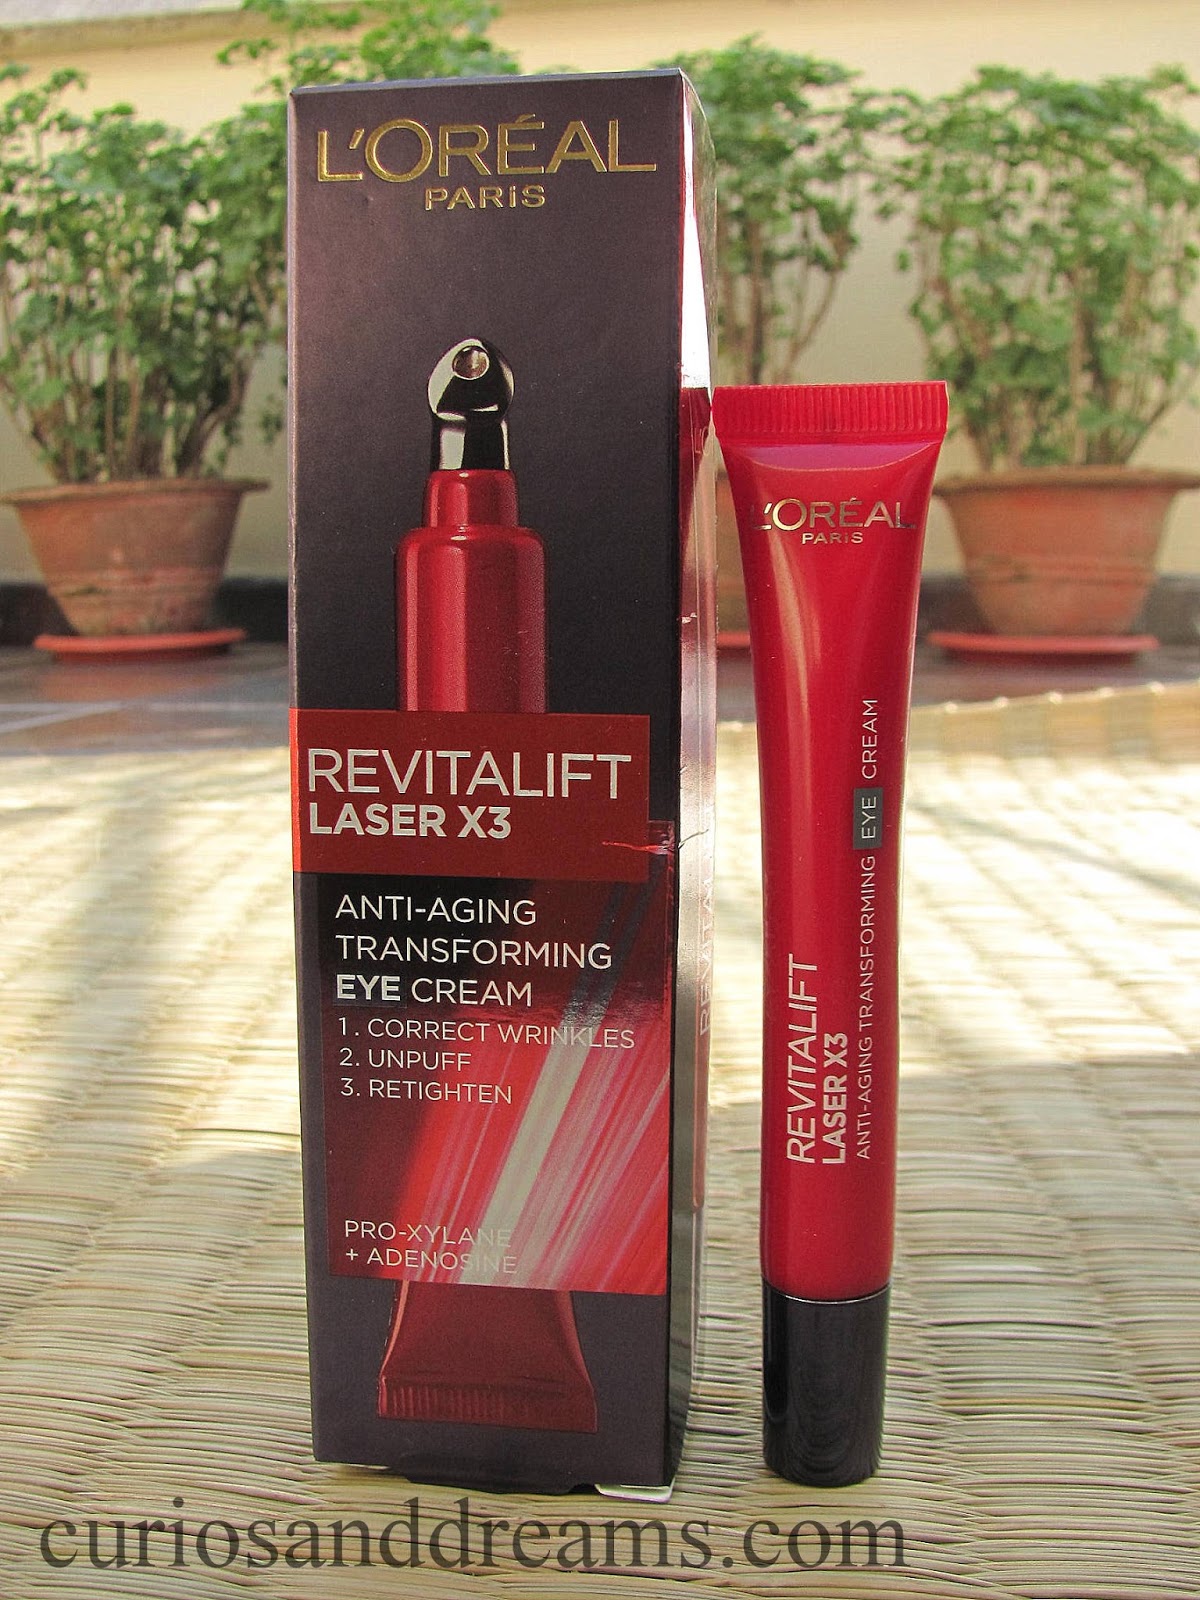 prioriteit borst Calamiteit L'Oreal Paris Revitalift Laser x3 Anti-Aging Transforming Eye Cream :  Review - Curios and Dreams - Indian Skincare and Beauty